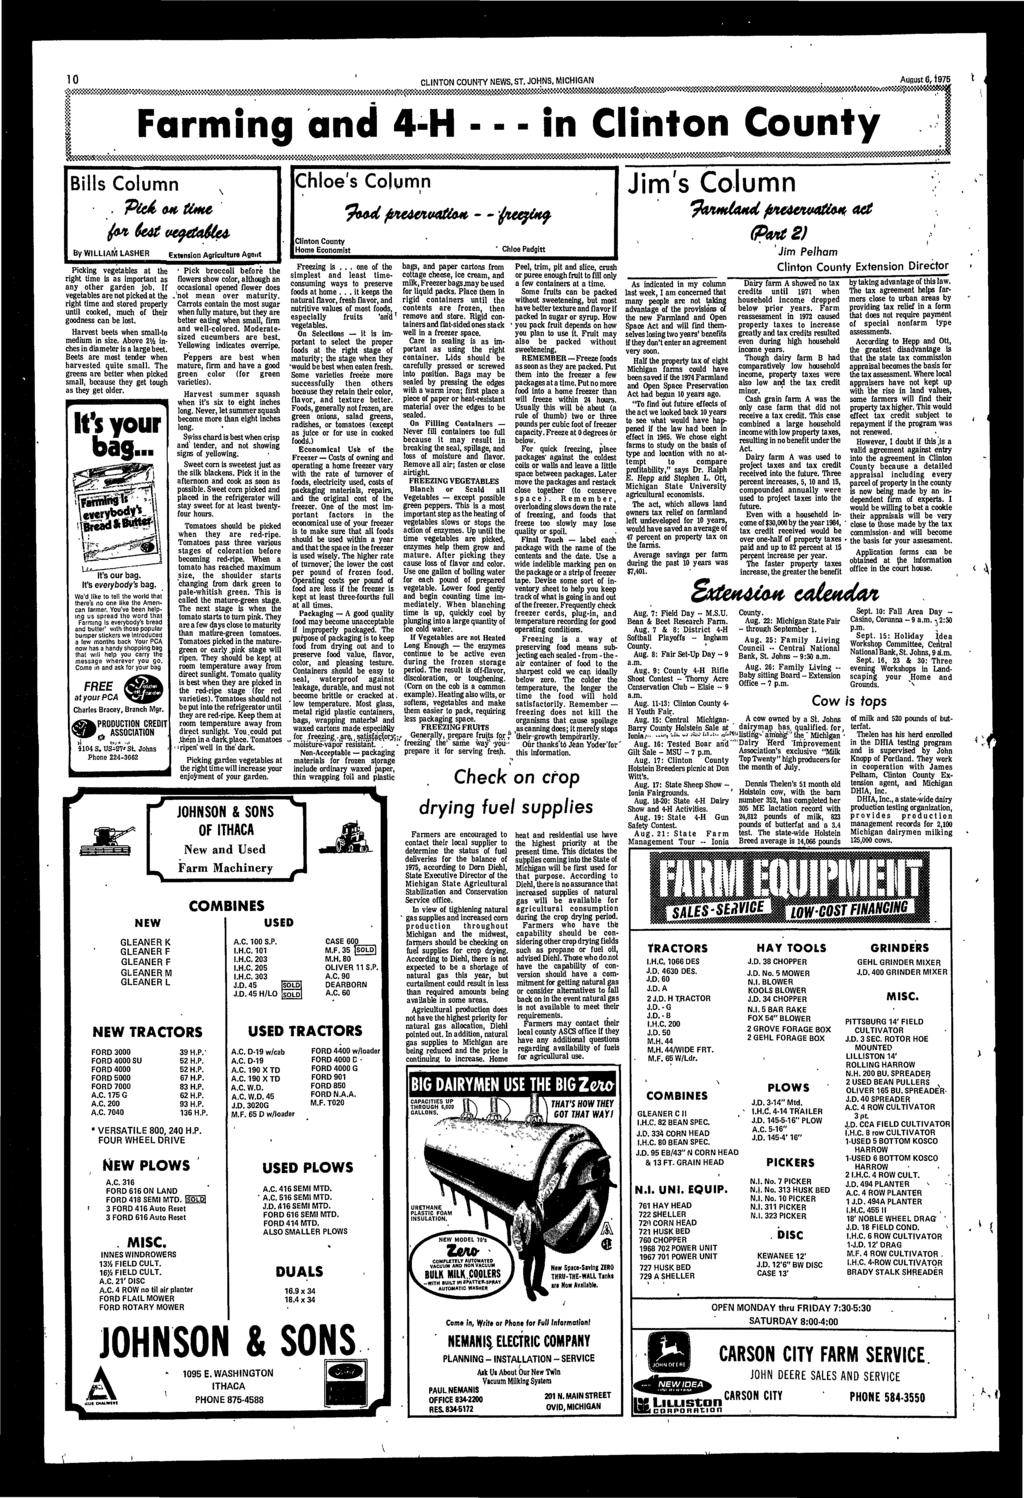 :... x... :, :. :.^^ CLINTON COUNTY NEWS, ST. JOHNS, MICHIGAN. Auoust, 1975 Farmng and 4-H n Clnton County «<«TO>XW»>>>>XW>W.VAVKW?>>X., -. - -.-..-...-. f..-. -..r. f,- Blls Column.